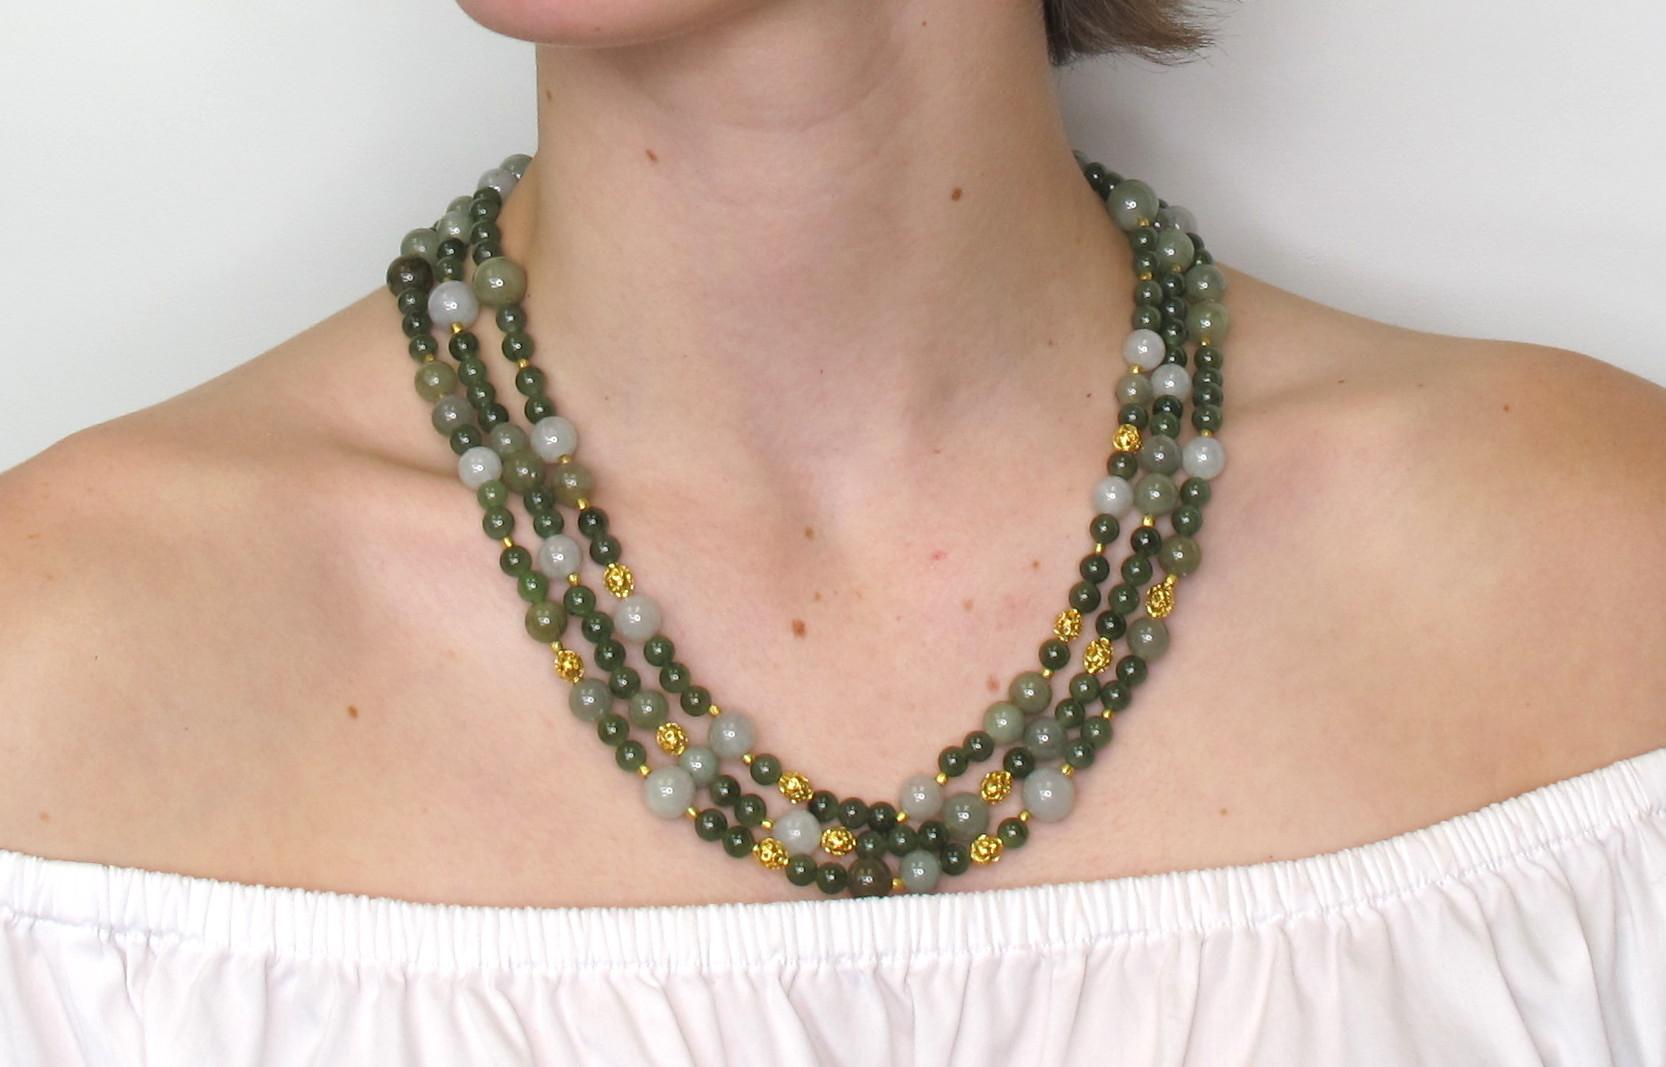 3-Strand Multi-Colored Jade Beaded Necklace with 18k and 22k Yellow Gold Accents For Sale 1